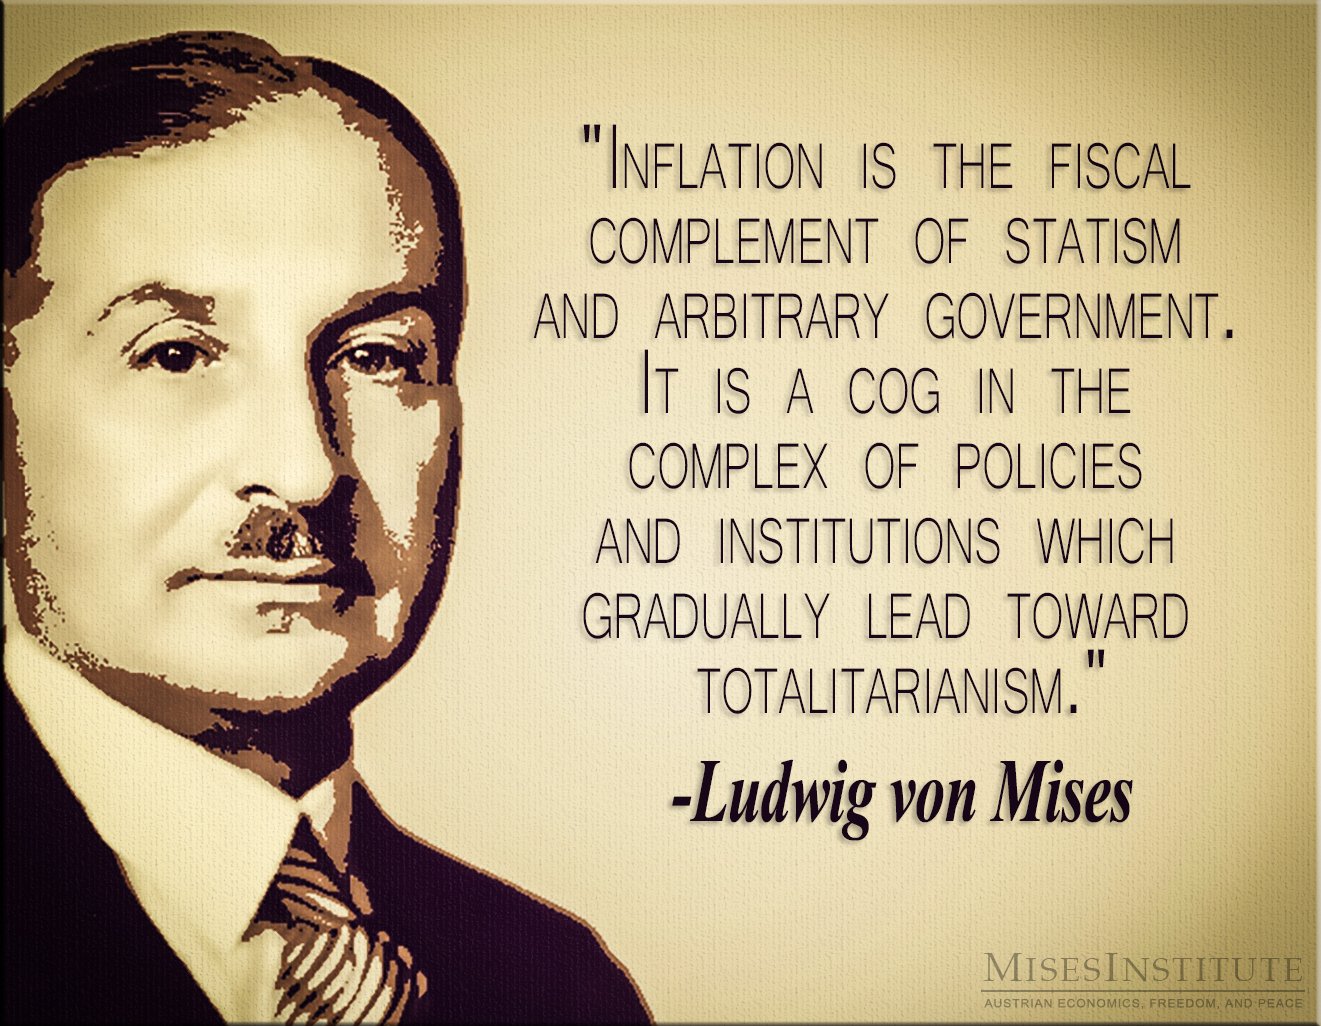 Mises Institute on Twitter: "You can find this quote in Ludwig von Mises book, The Theory of Money and Credit: https://t.co/Tjmsds59r5 https://t.co/XI39xBYp11" / Twitter